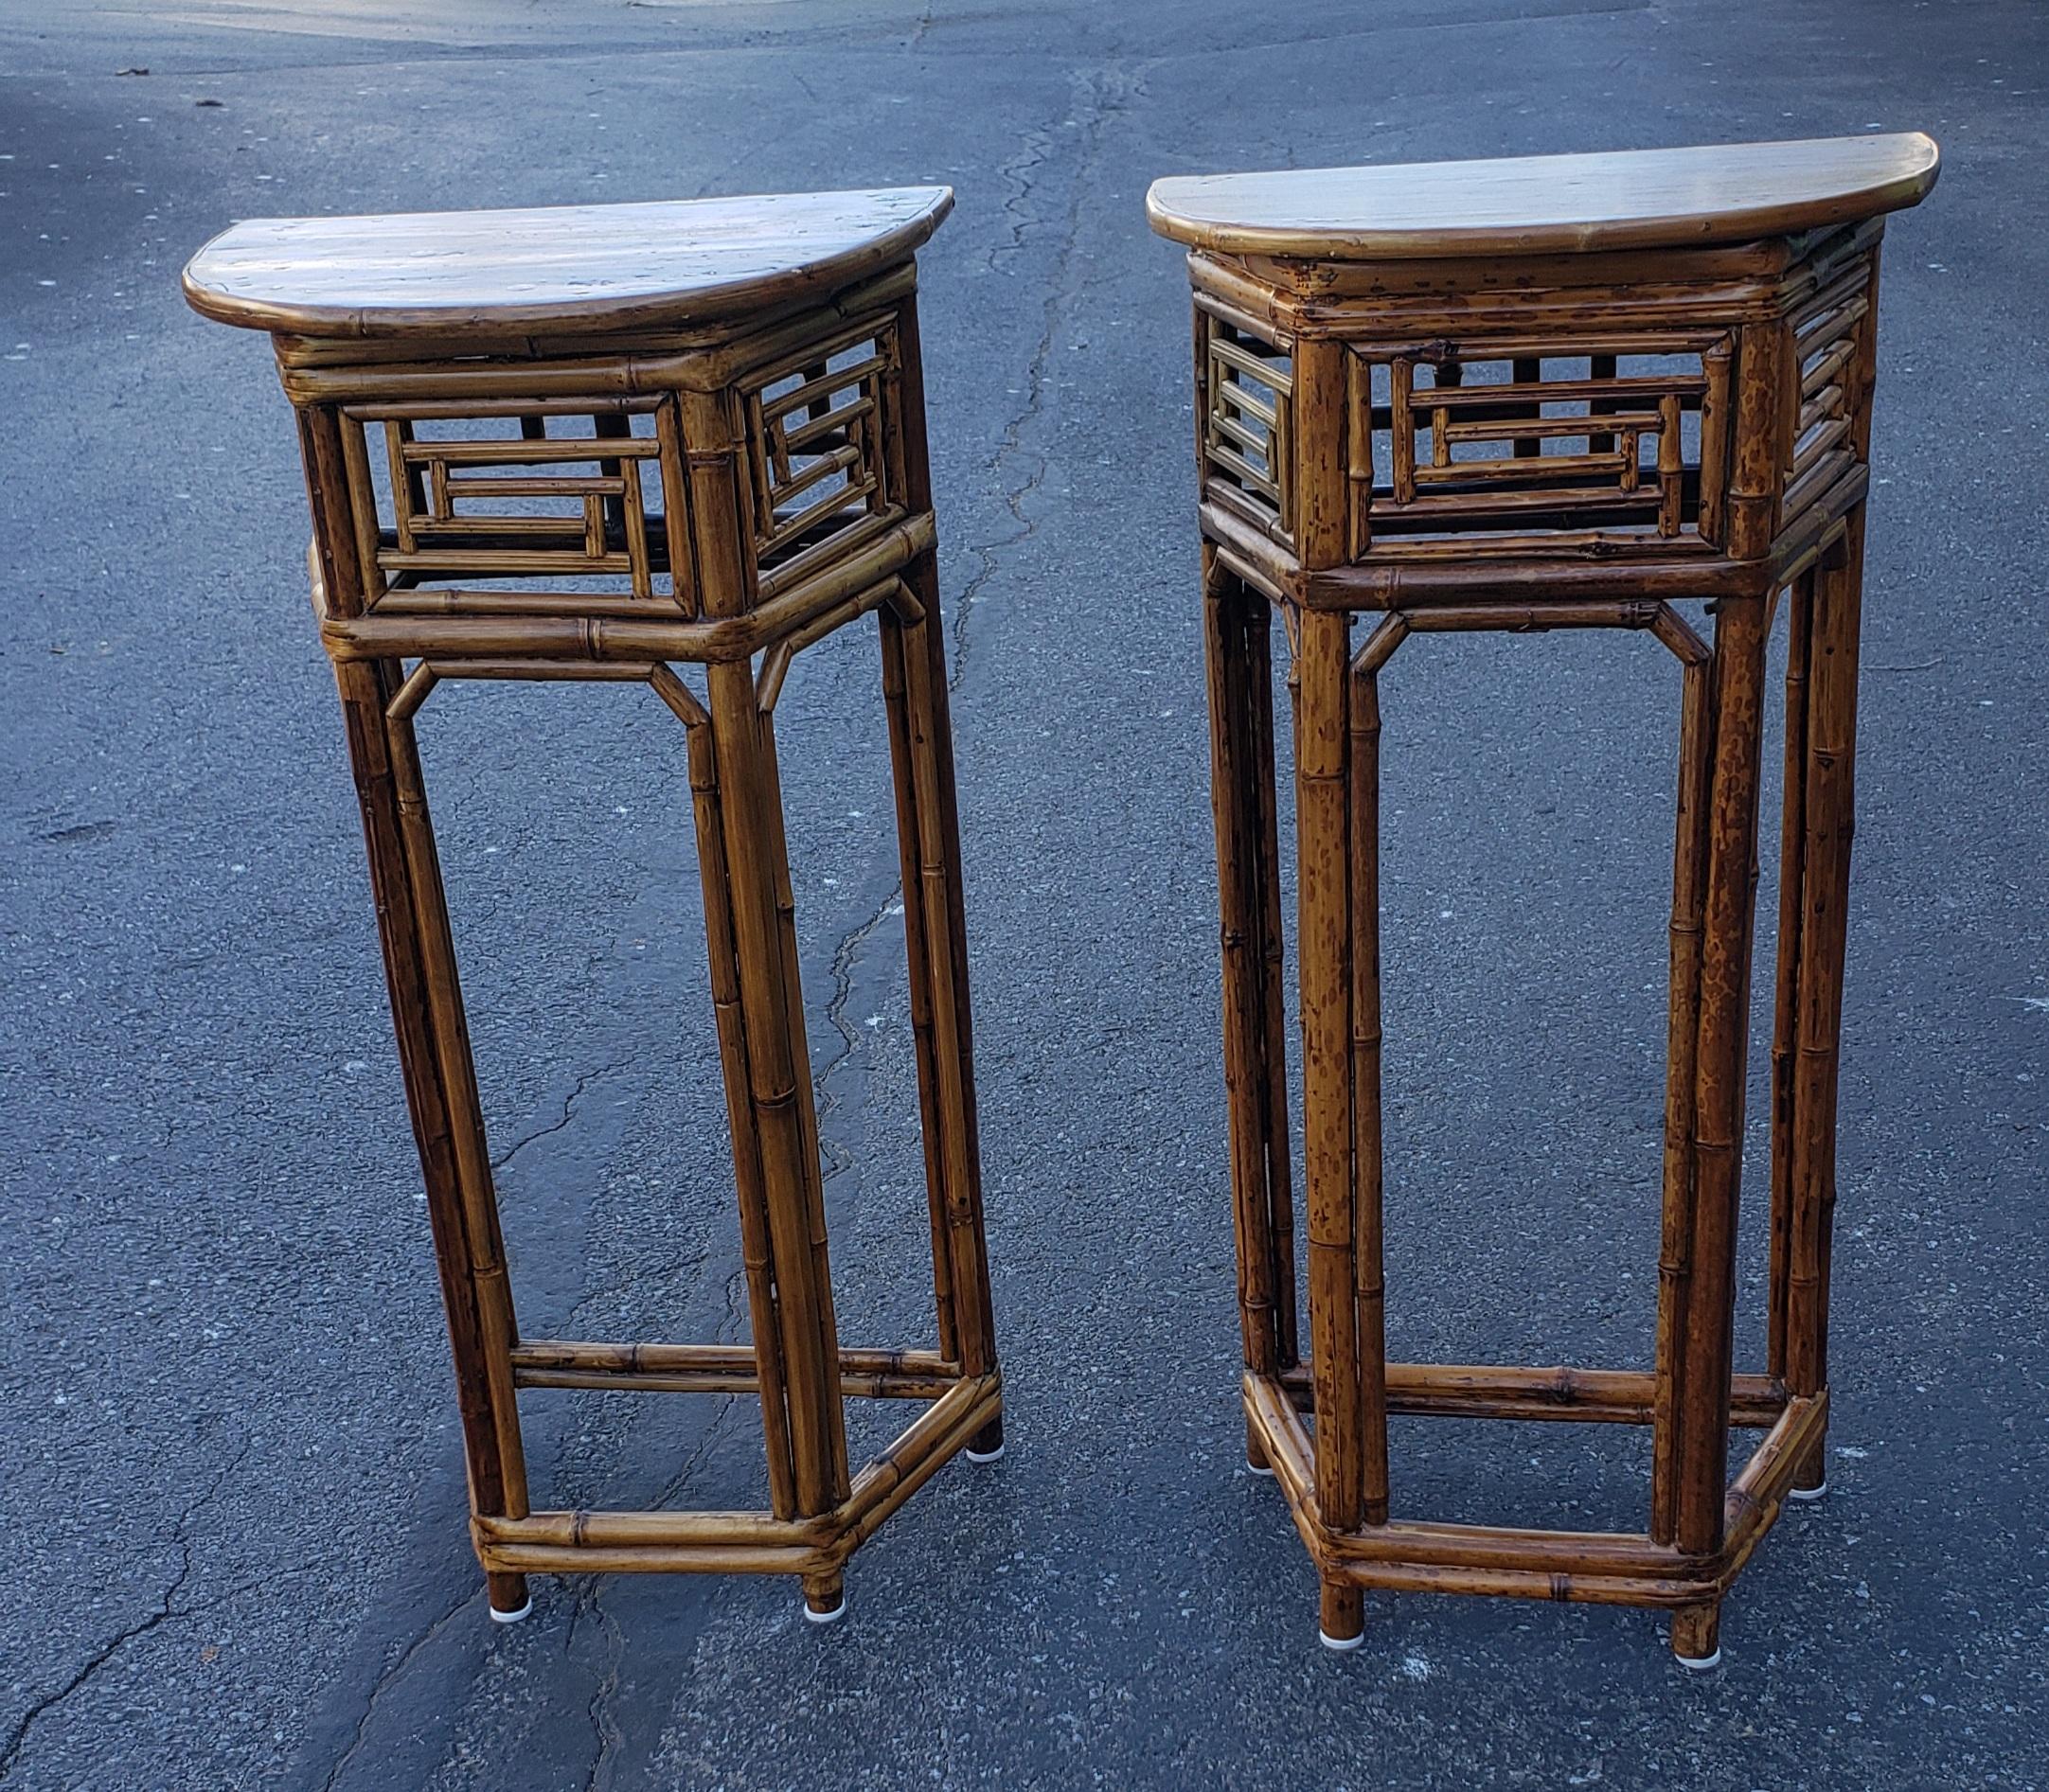 Pair of Midcentury Asian Bamboo and Wood Demilune Side Tables or Plant Stands 2